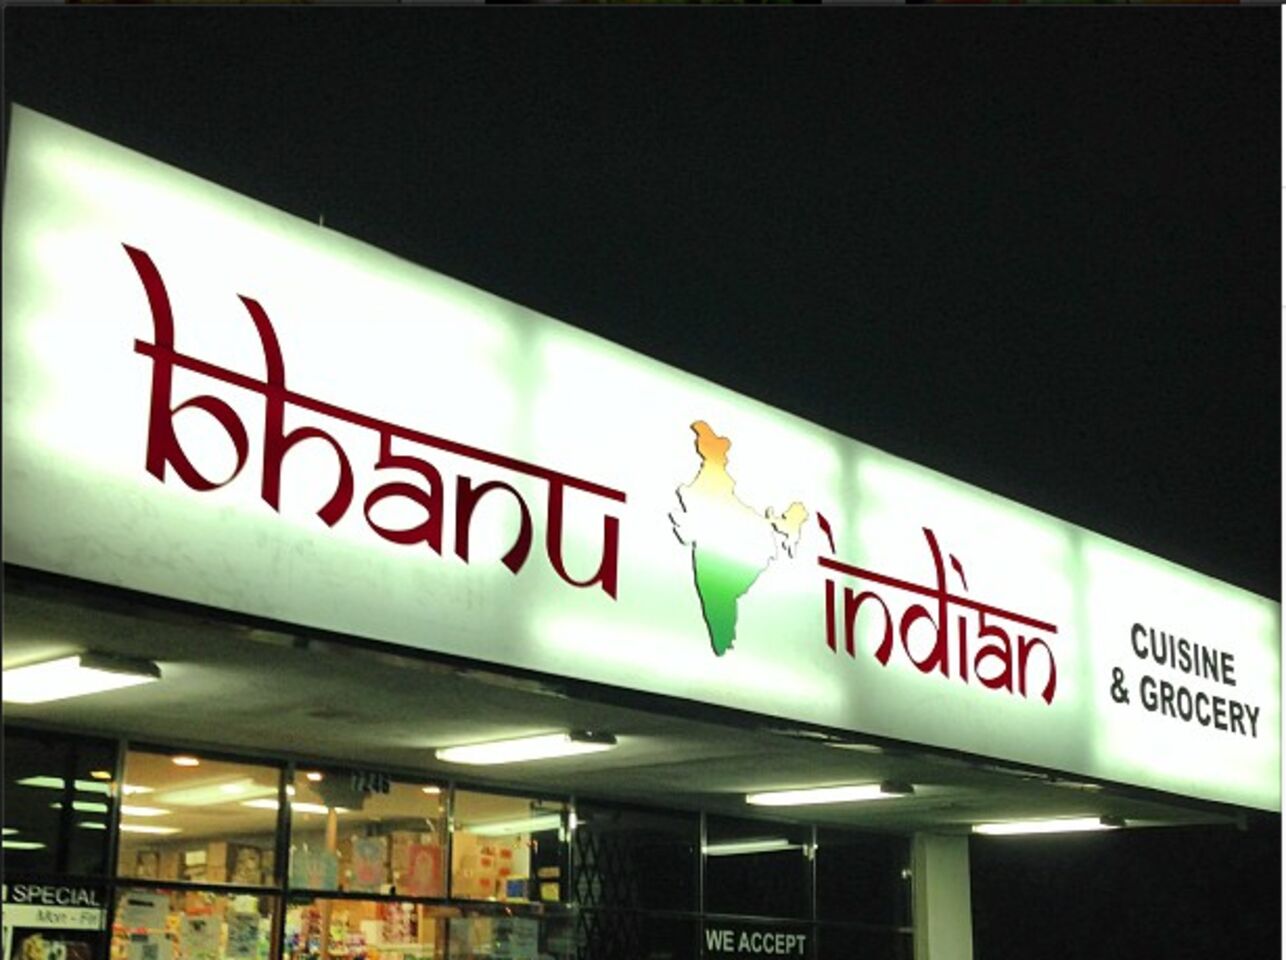 A photo of Bhanu's Indian Grocery & Cuisine